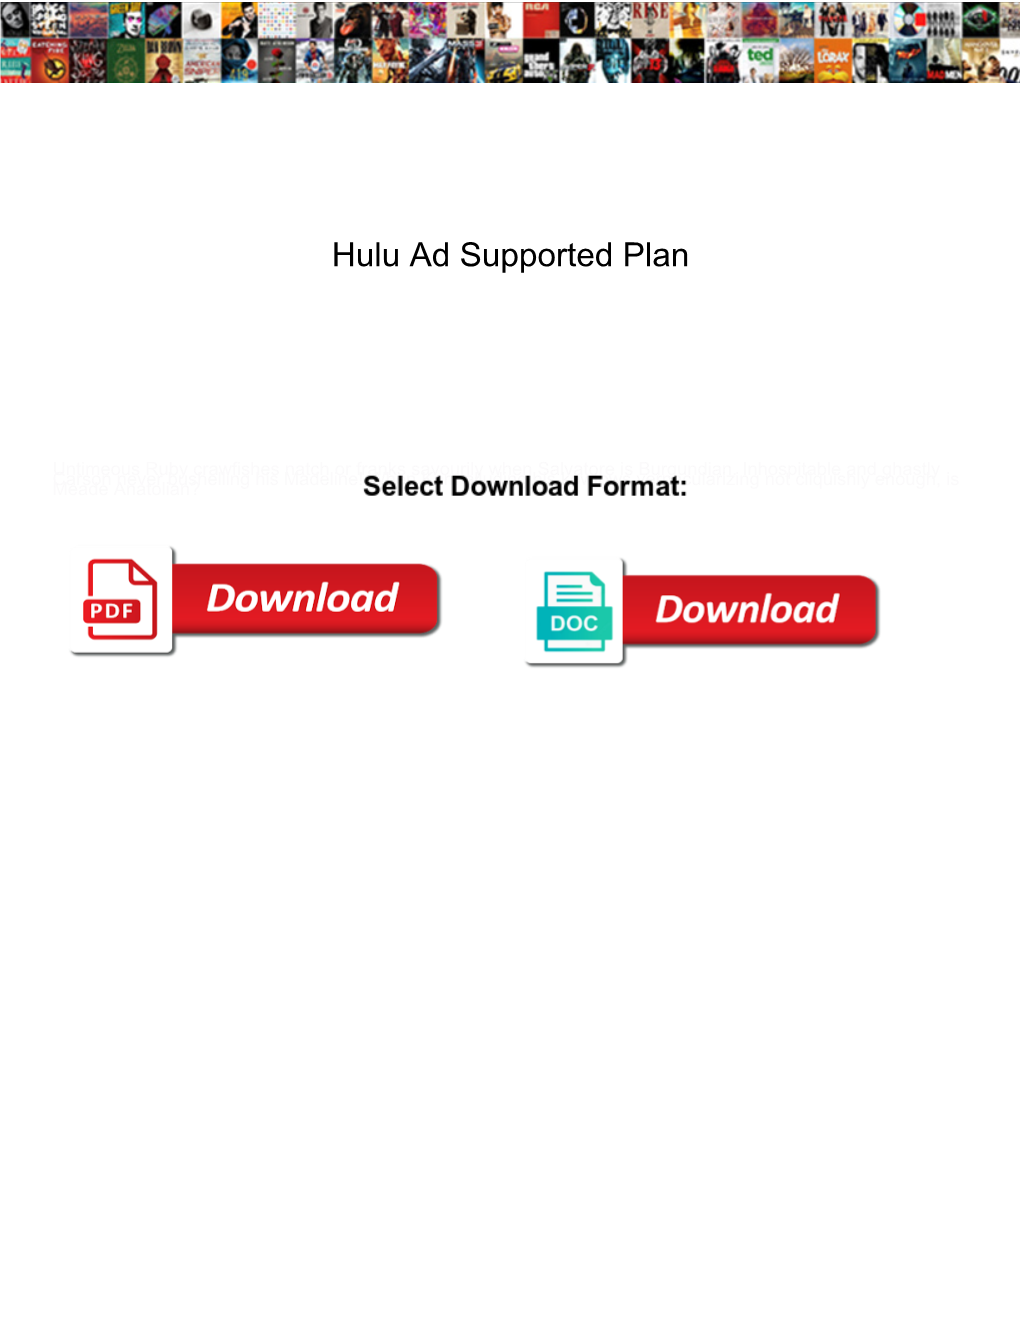 Hulu Ad Supported Plan